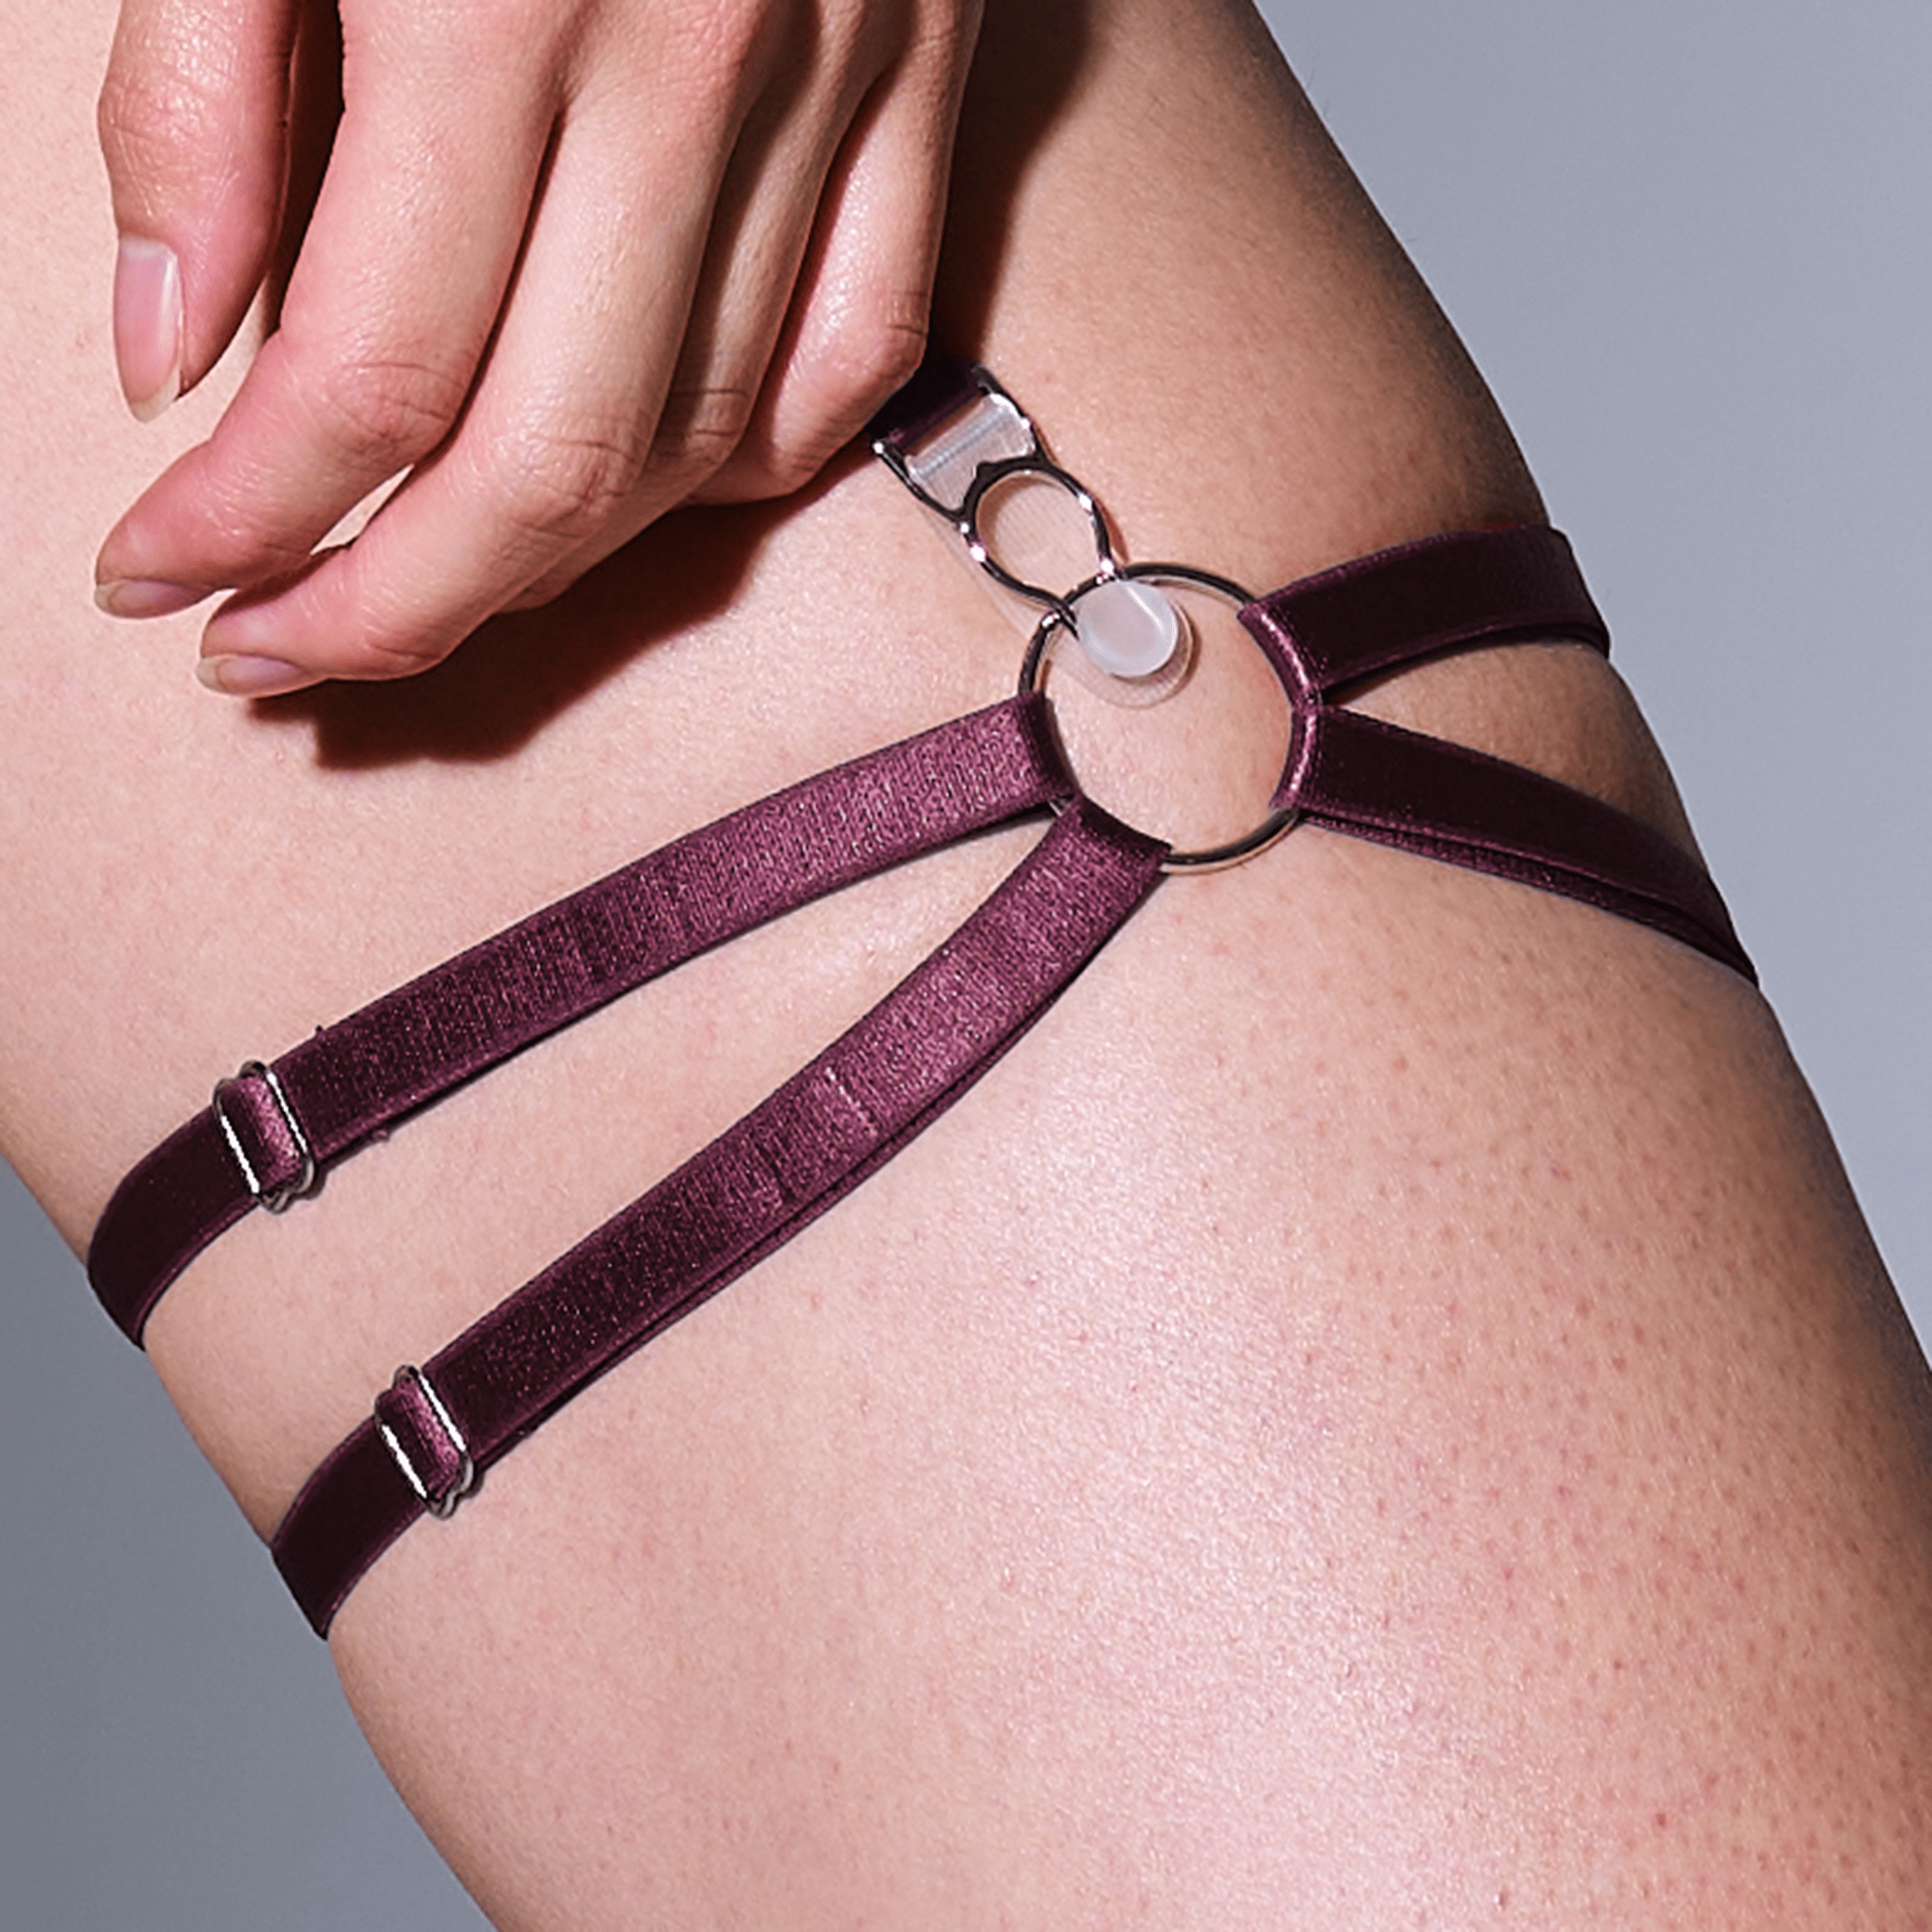 Strapped in Thigh Garters - Cordial